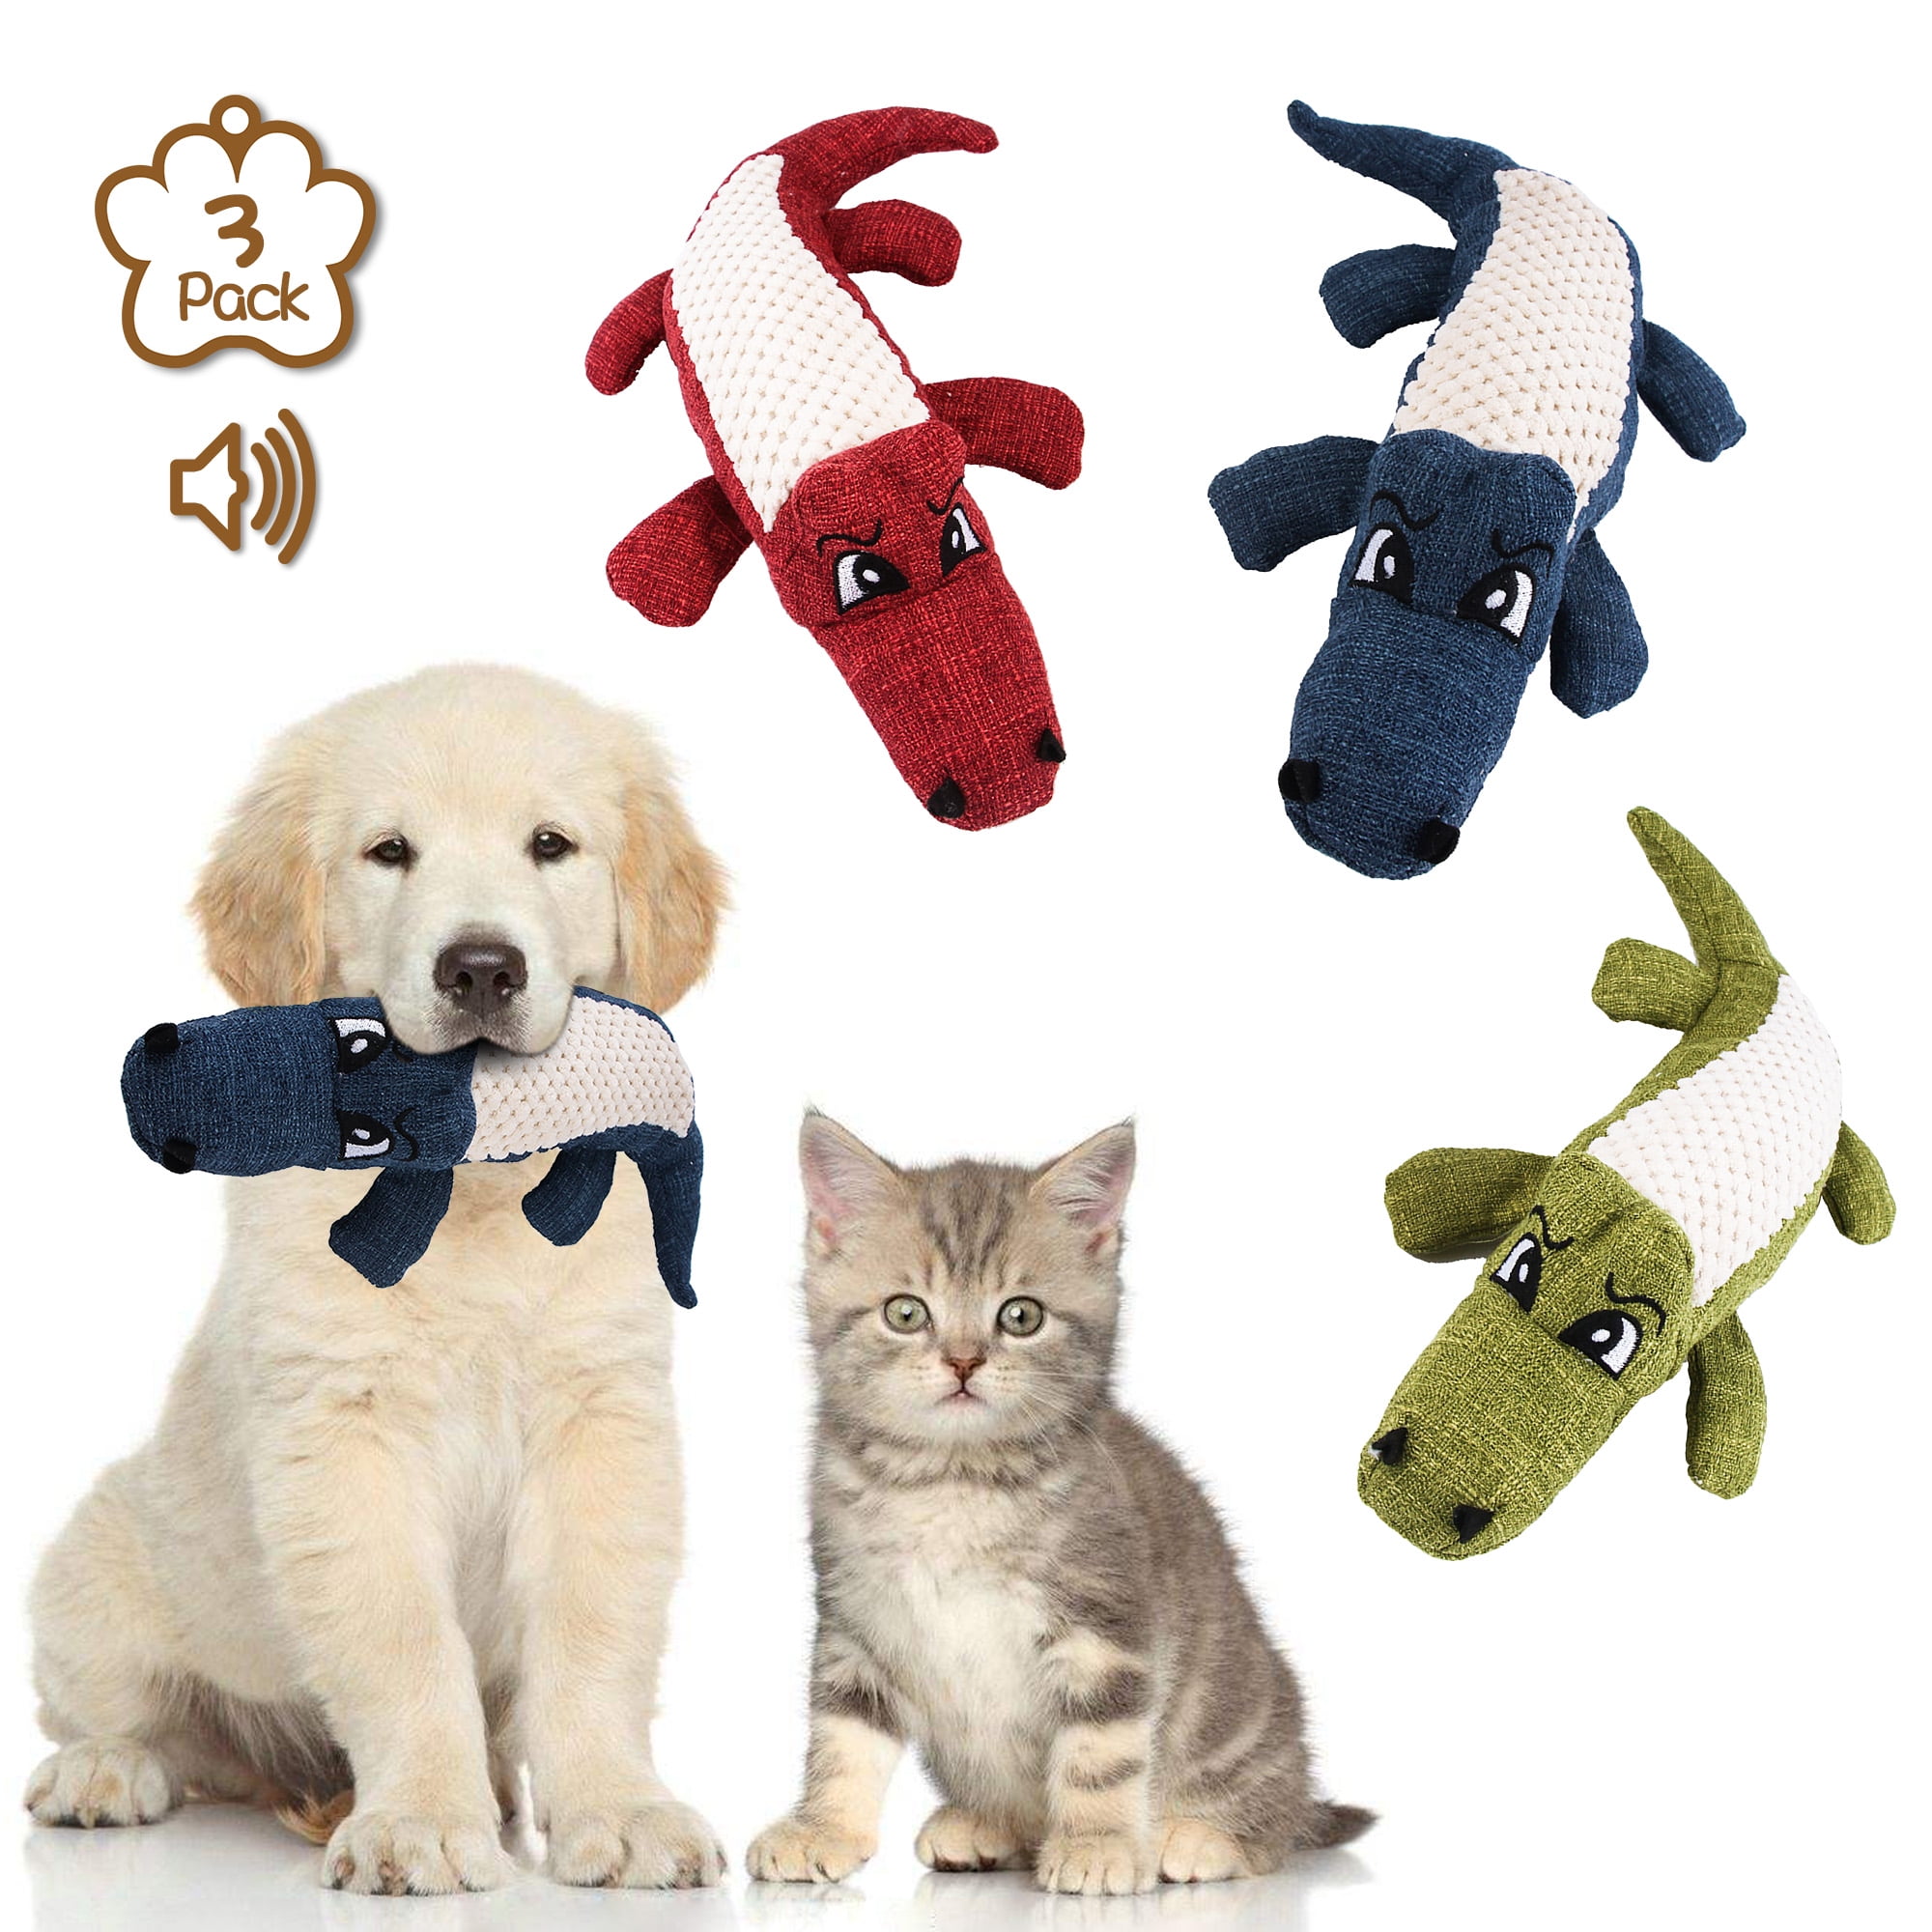 stuffed animal toys for dogs